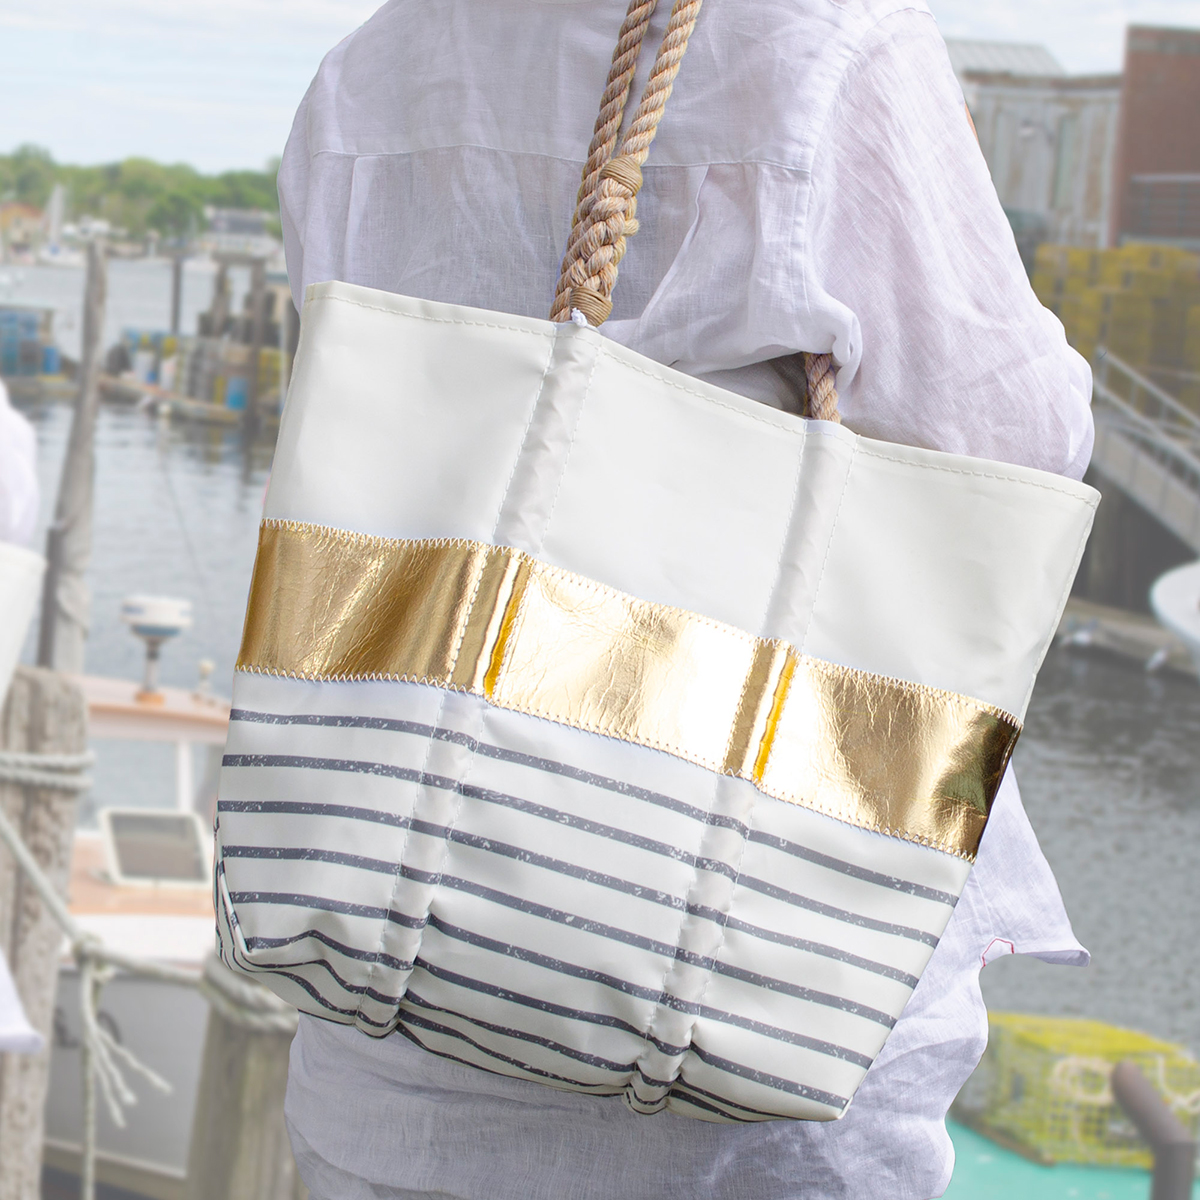 GREY STRIPED BEACH TOTE BAG PURSE WITH FLOWER LINED FULL ZIPPER CLOSURE INDIANA